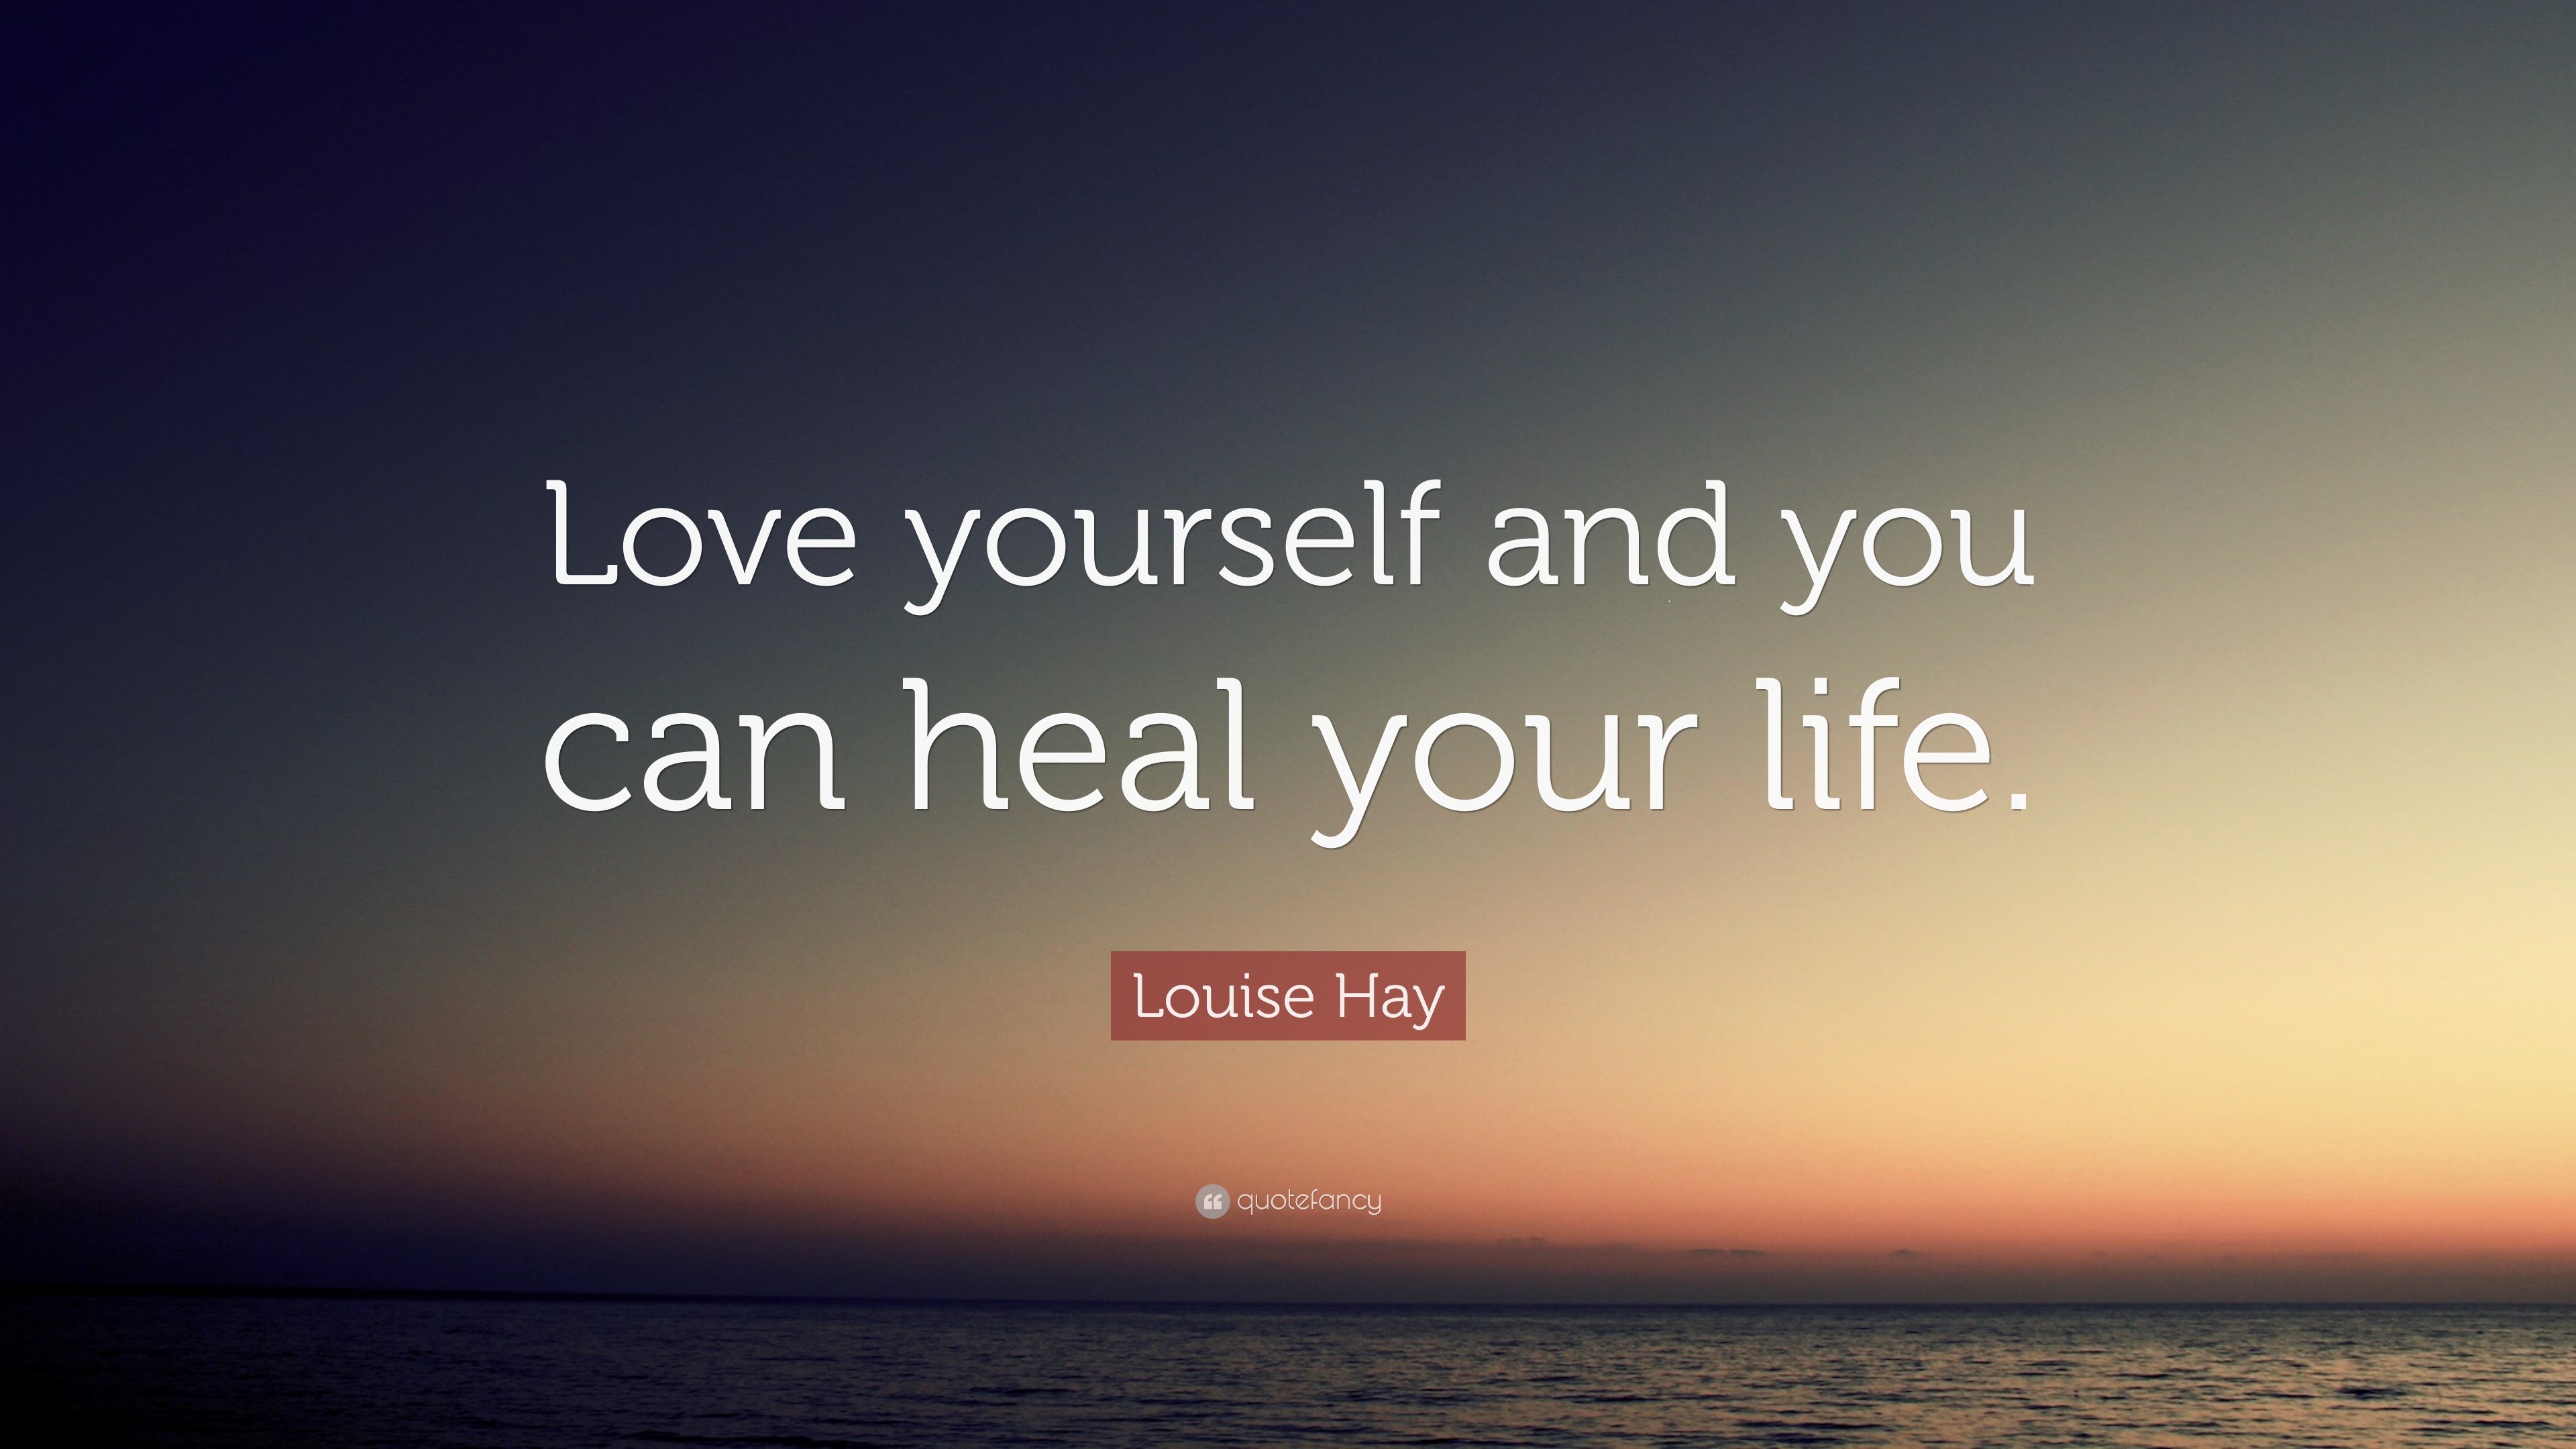 Louise Hay Quote “Love yourself and you can heal your life ”